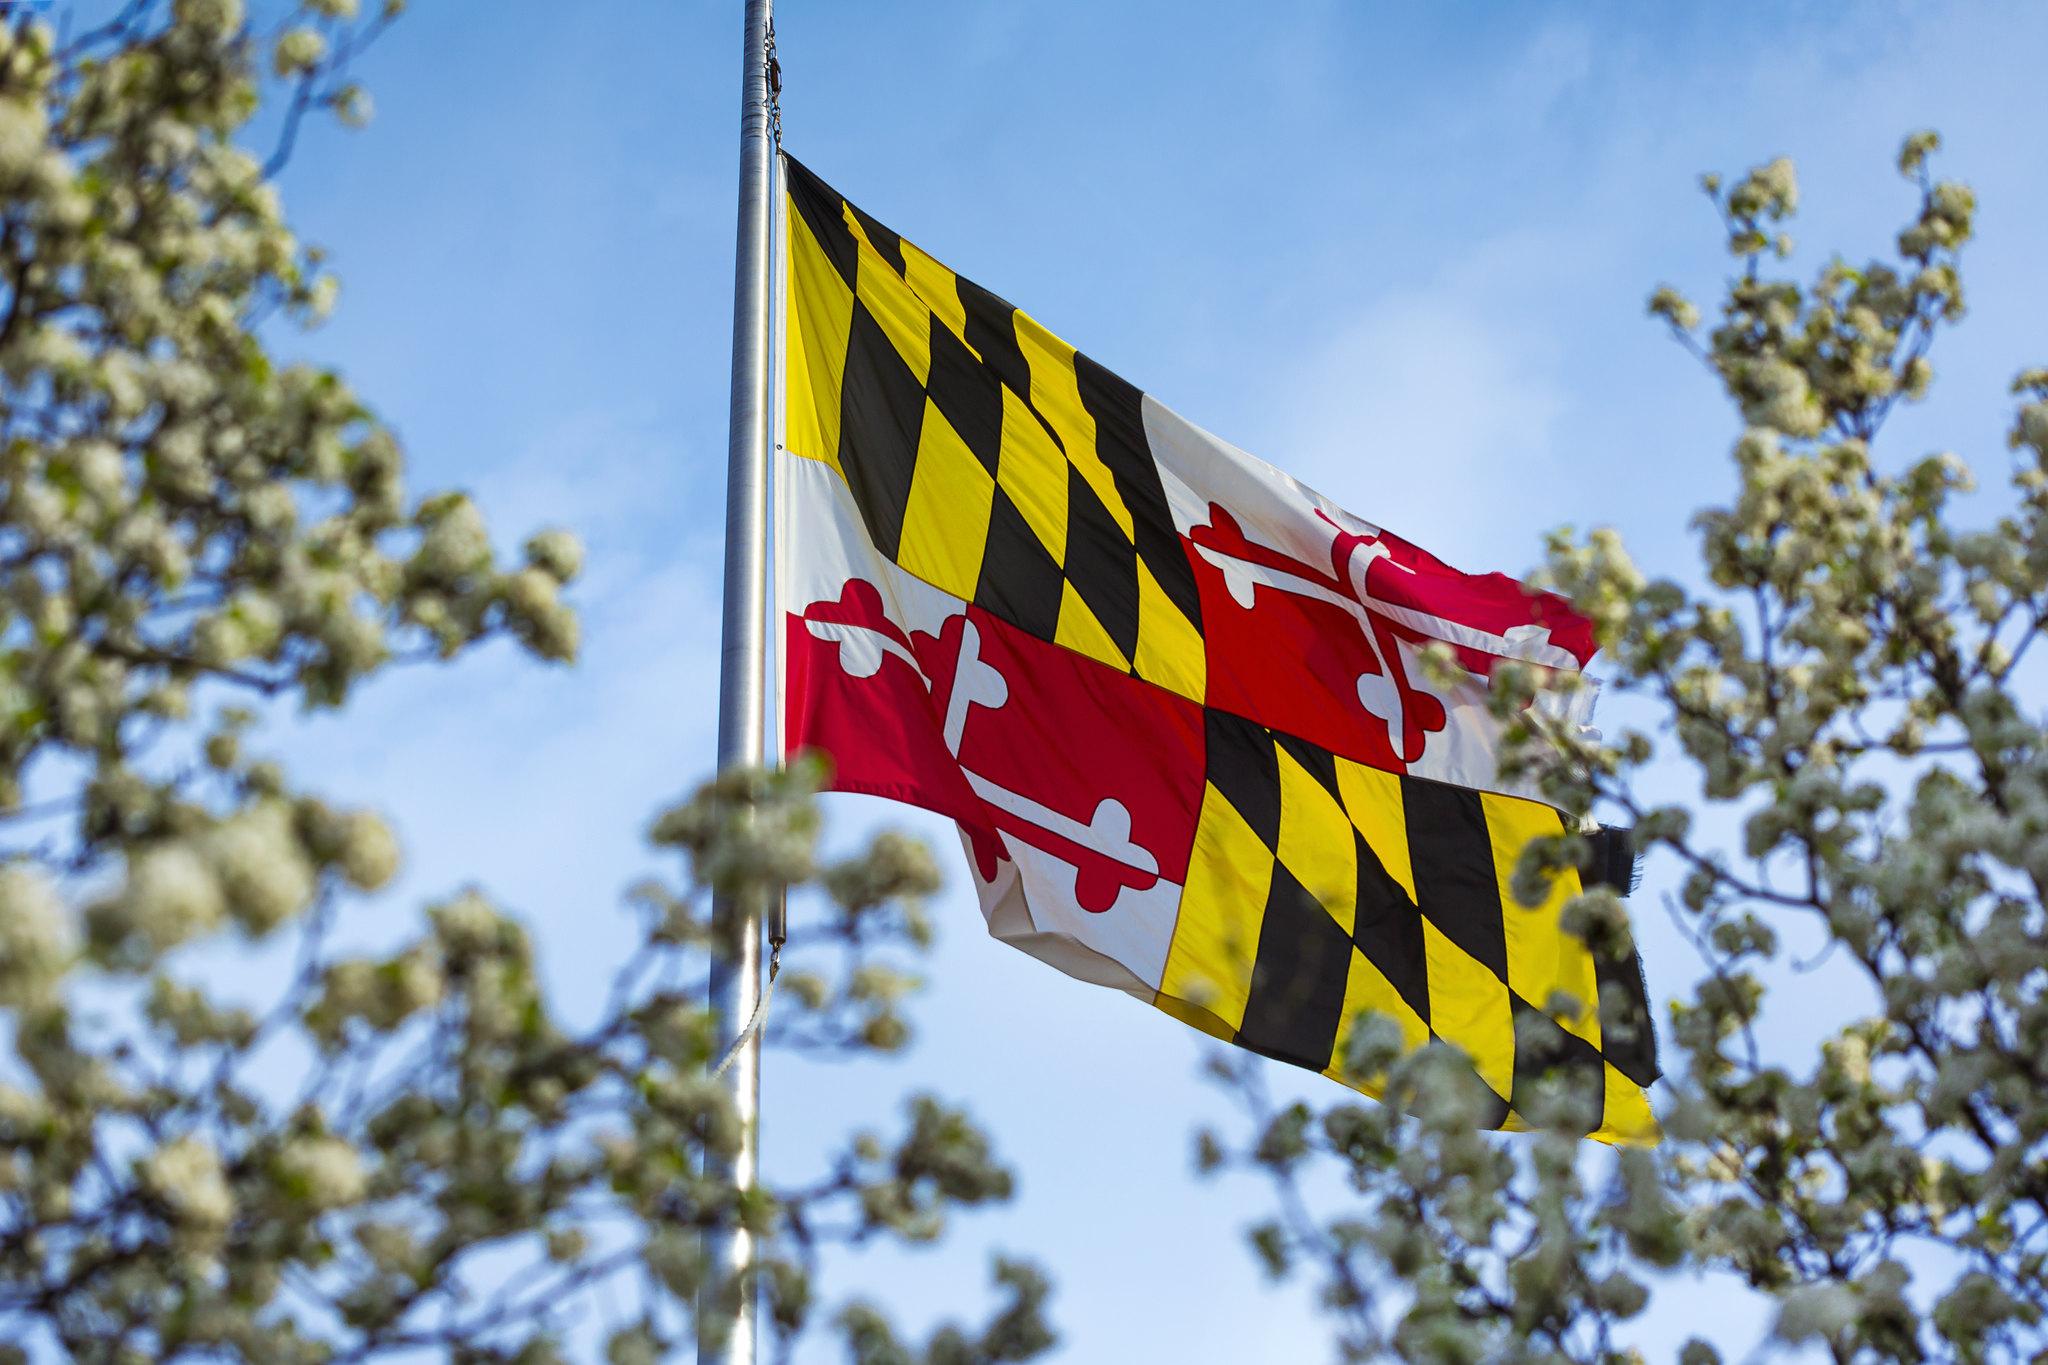 Maryland flag surrounded by cherry blossoms against a blue sky, flag near Riggs Alumni Center.